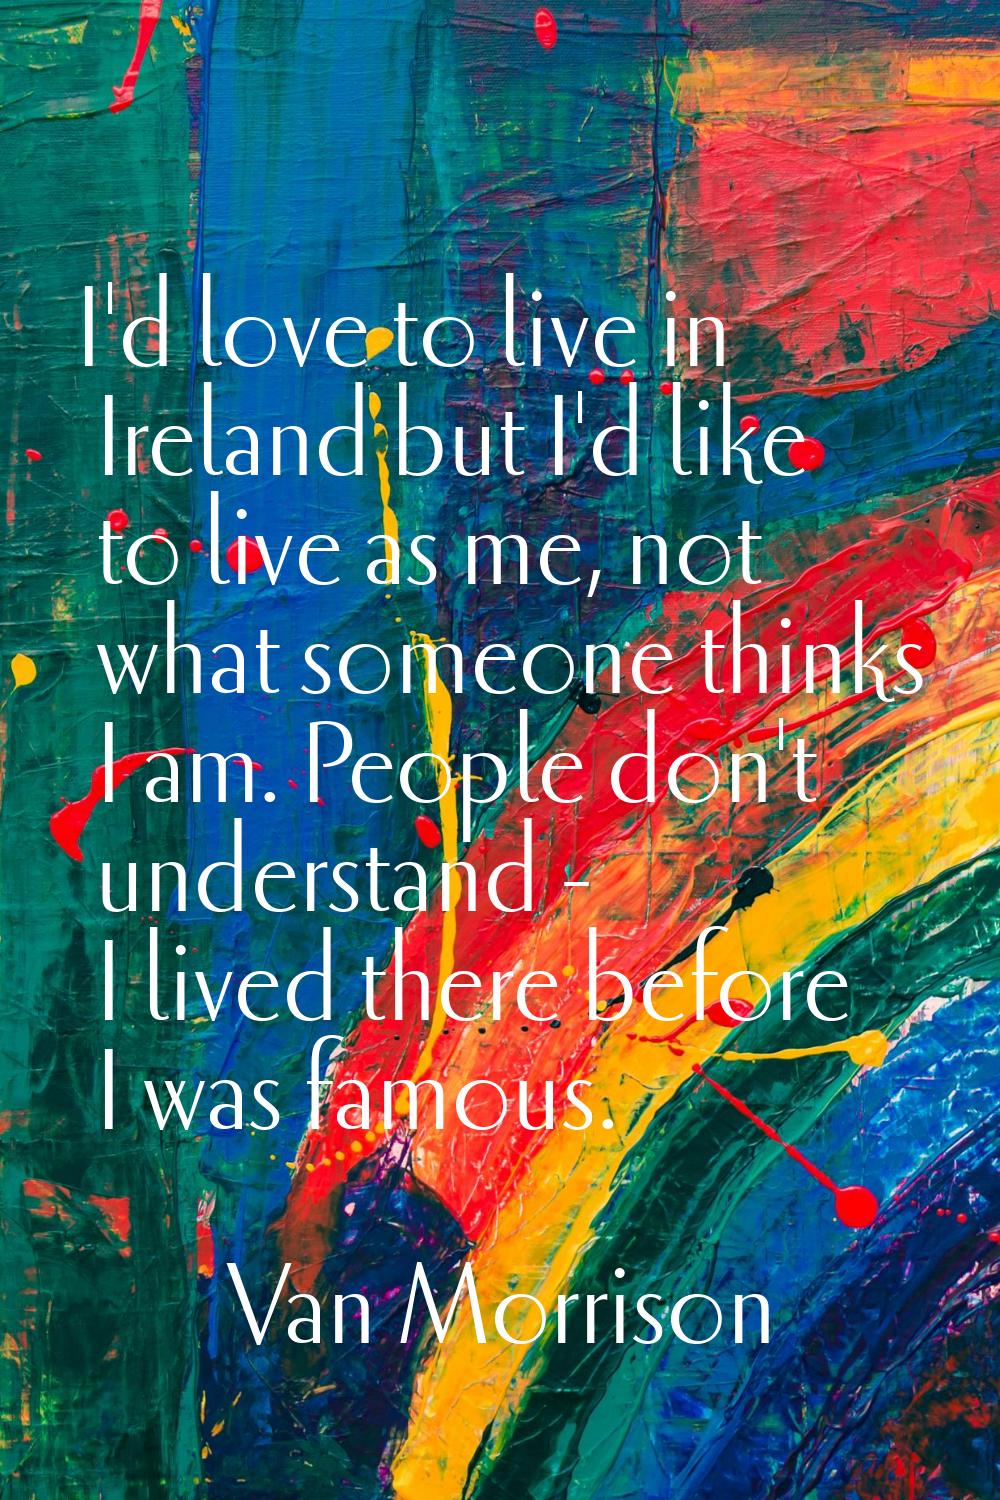 I'd love to live in Ireland but I'd like to live as me, not what someone thinks I am. People don't 